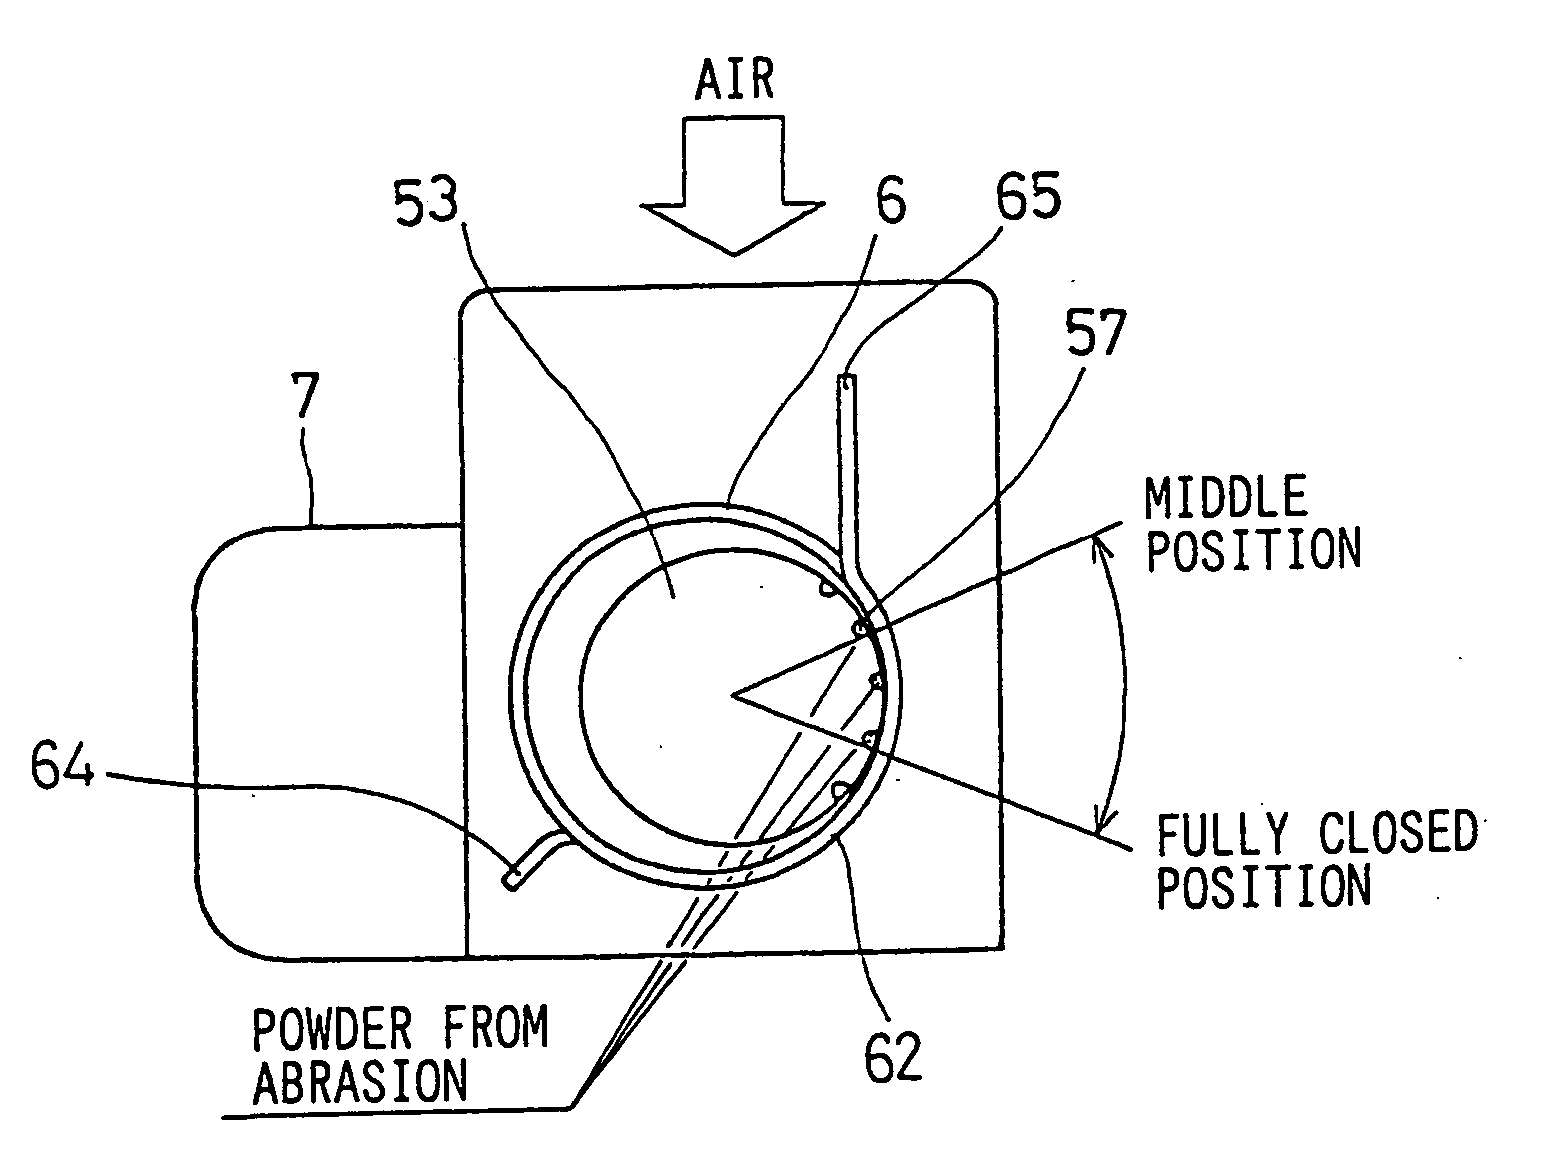 Electronically controlled throttle control apparatus